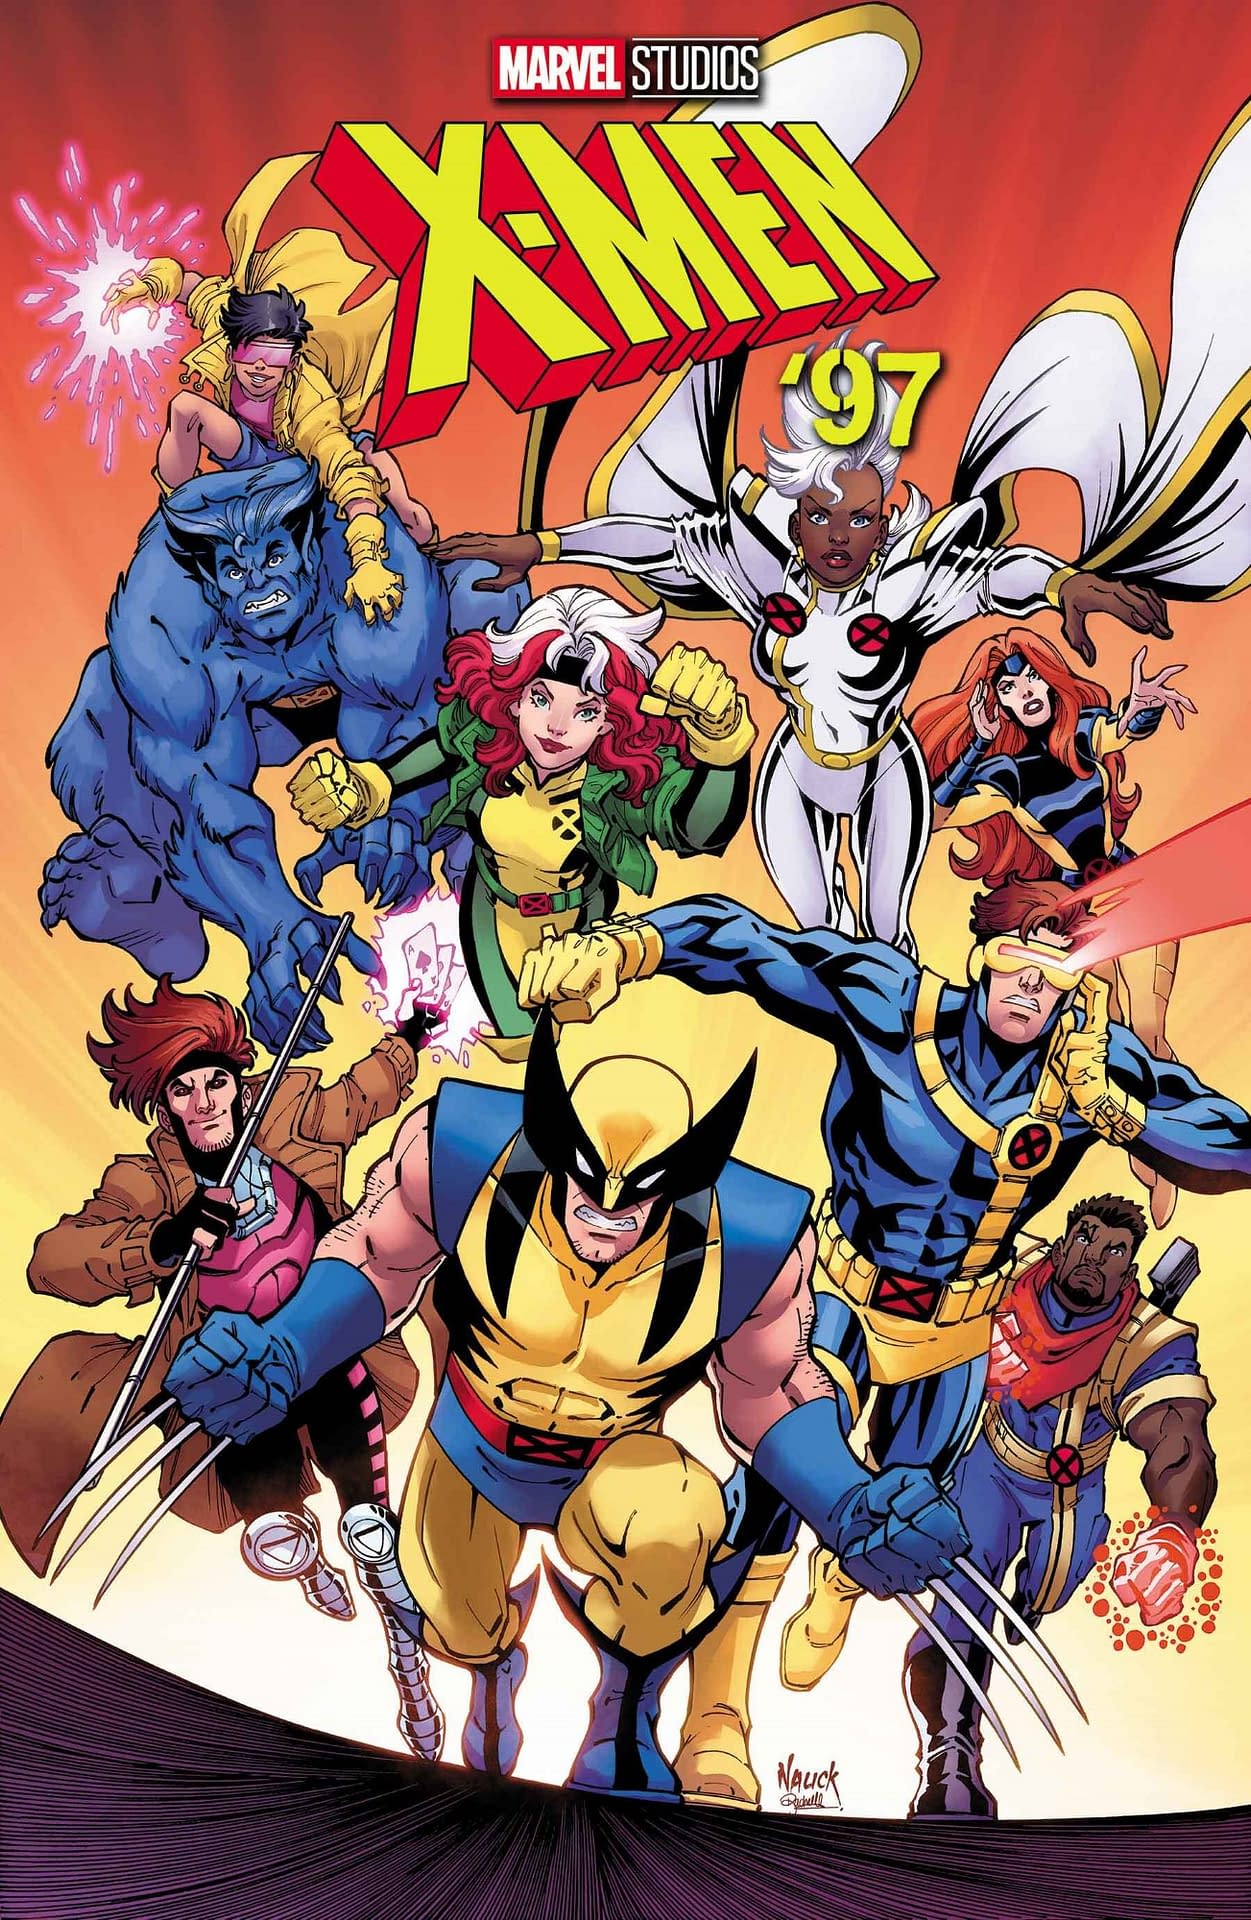 Marvel Comics Puts Out XMen '97 In March 2024